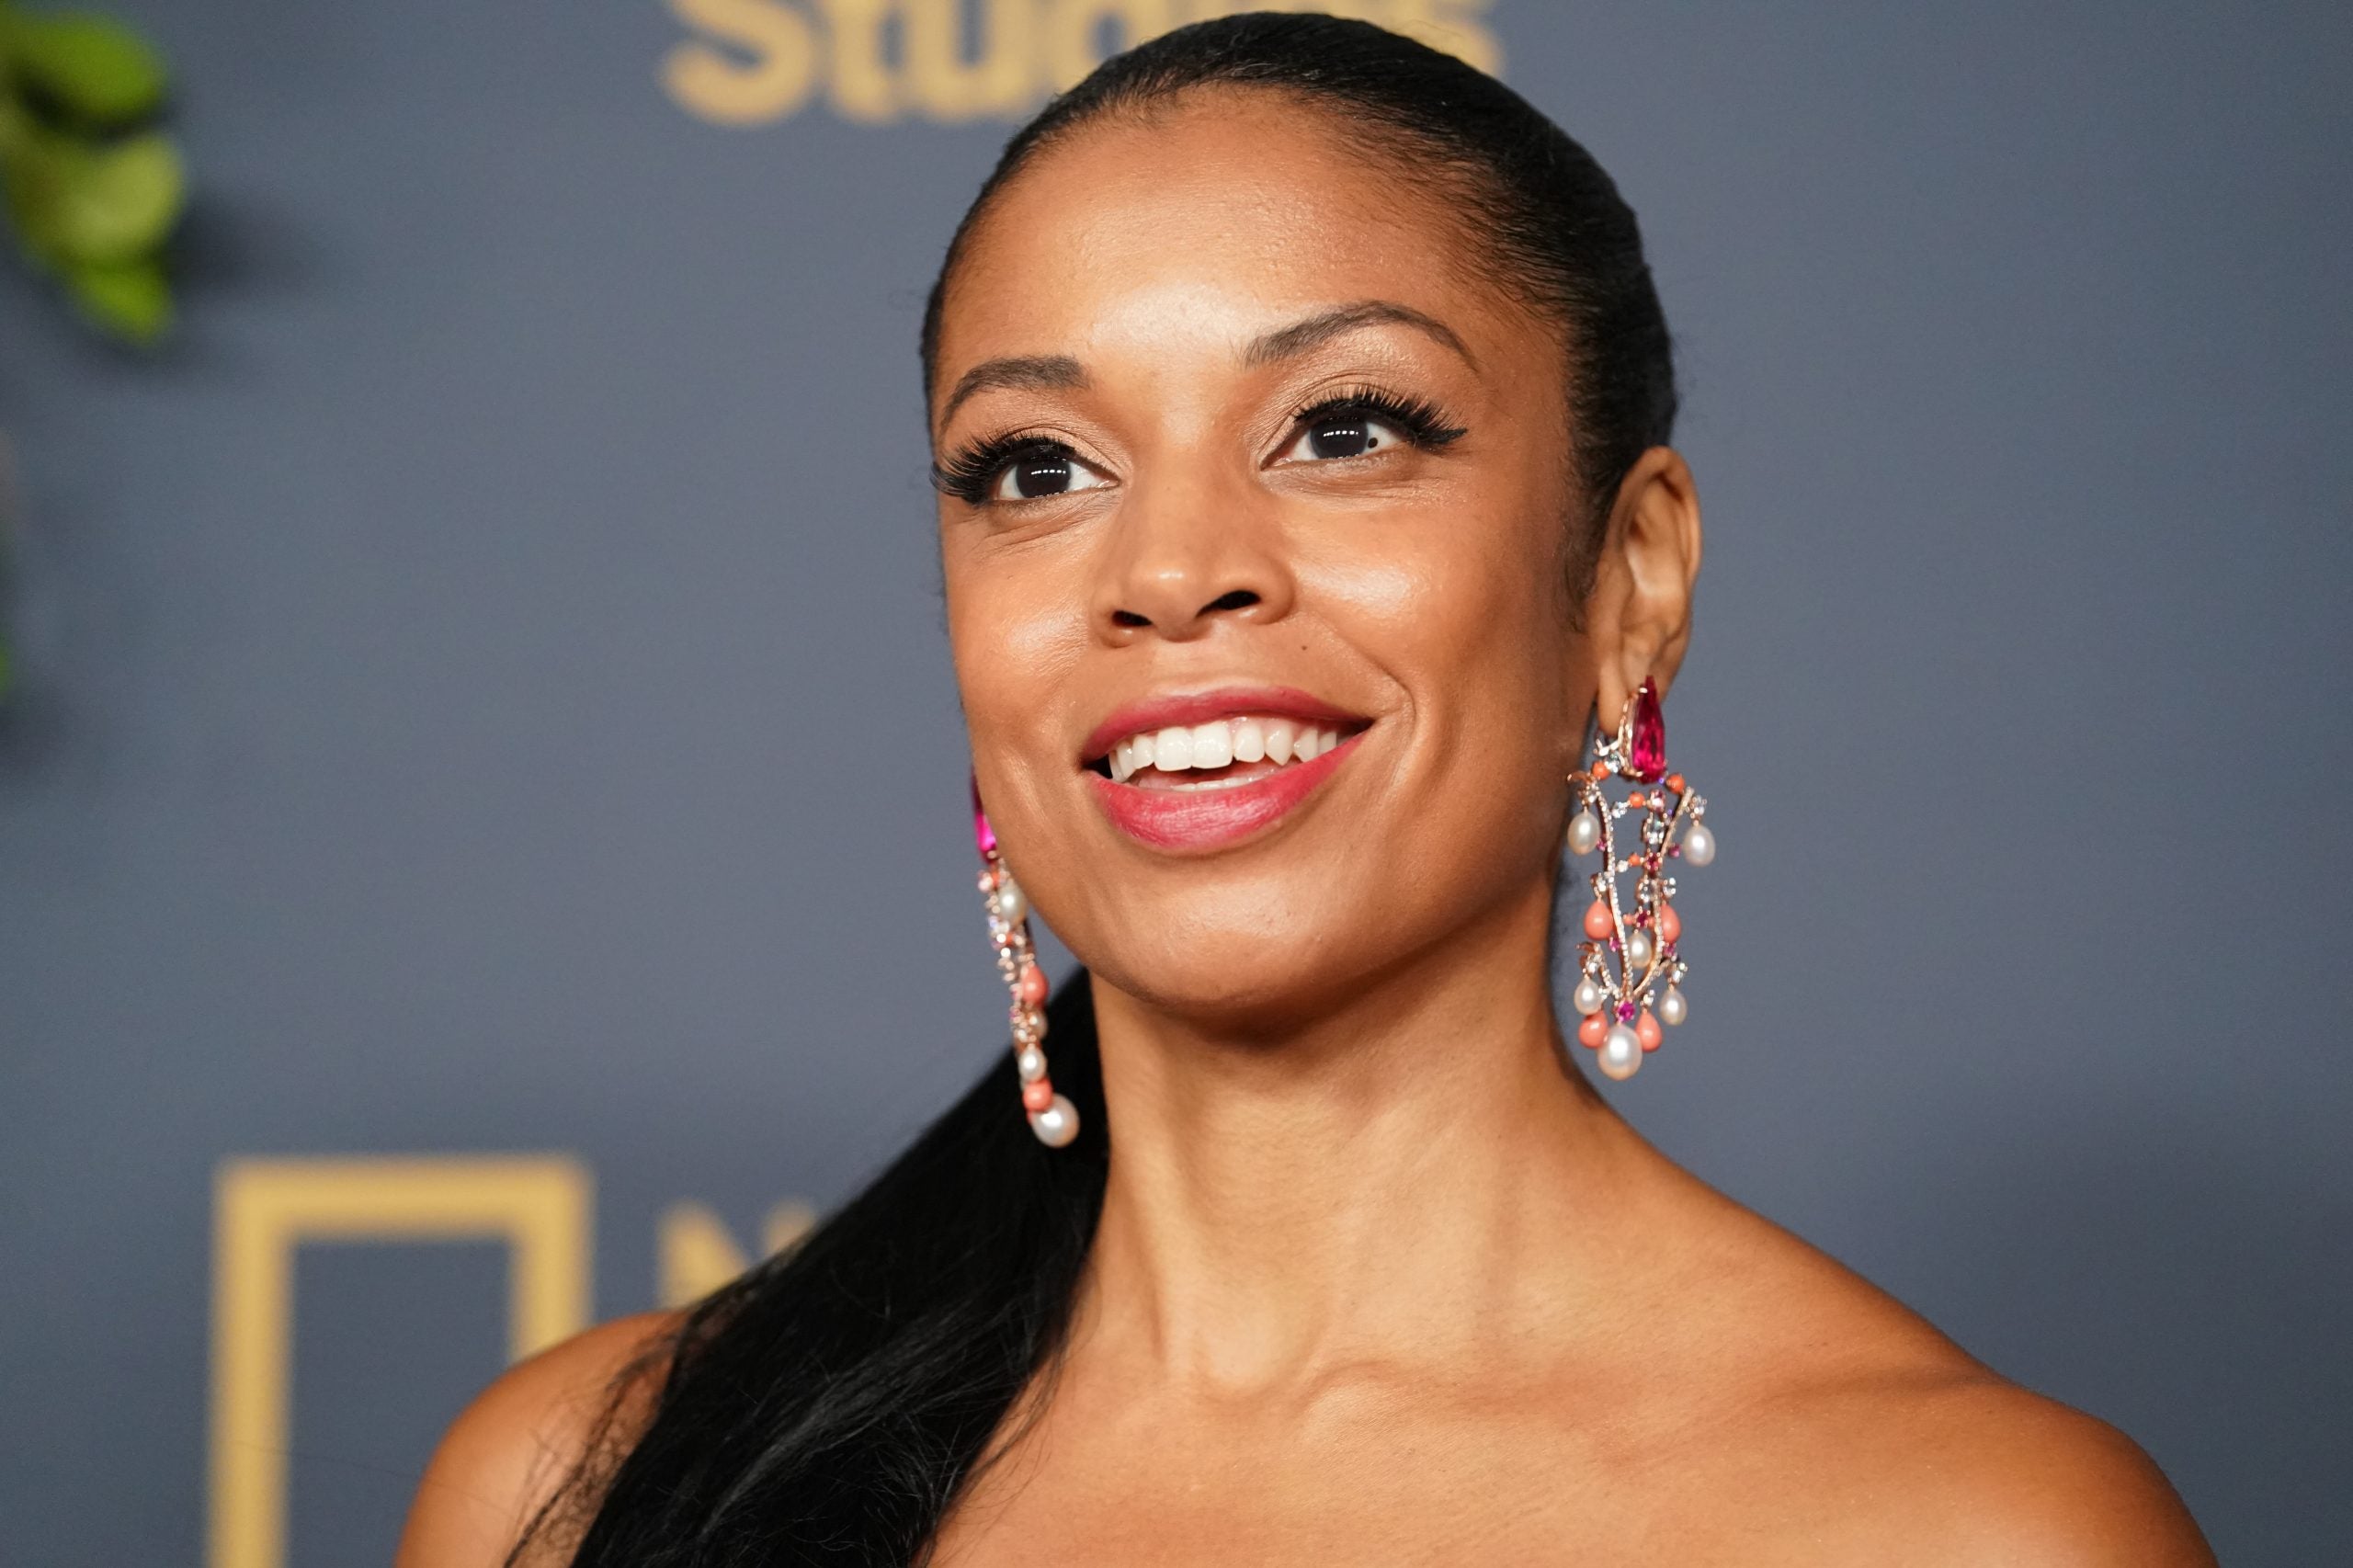 'This Is Us' Star Susan Kelechi Watson Reveals She Is Now Single